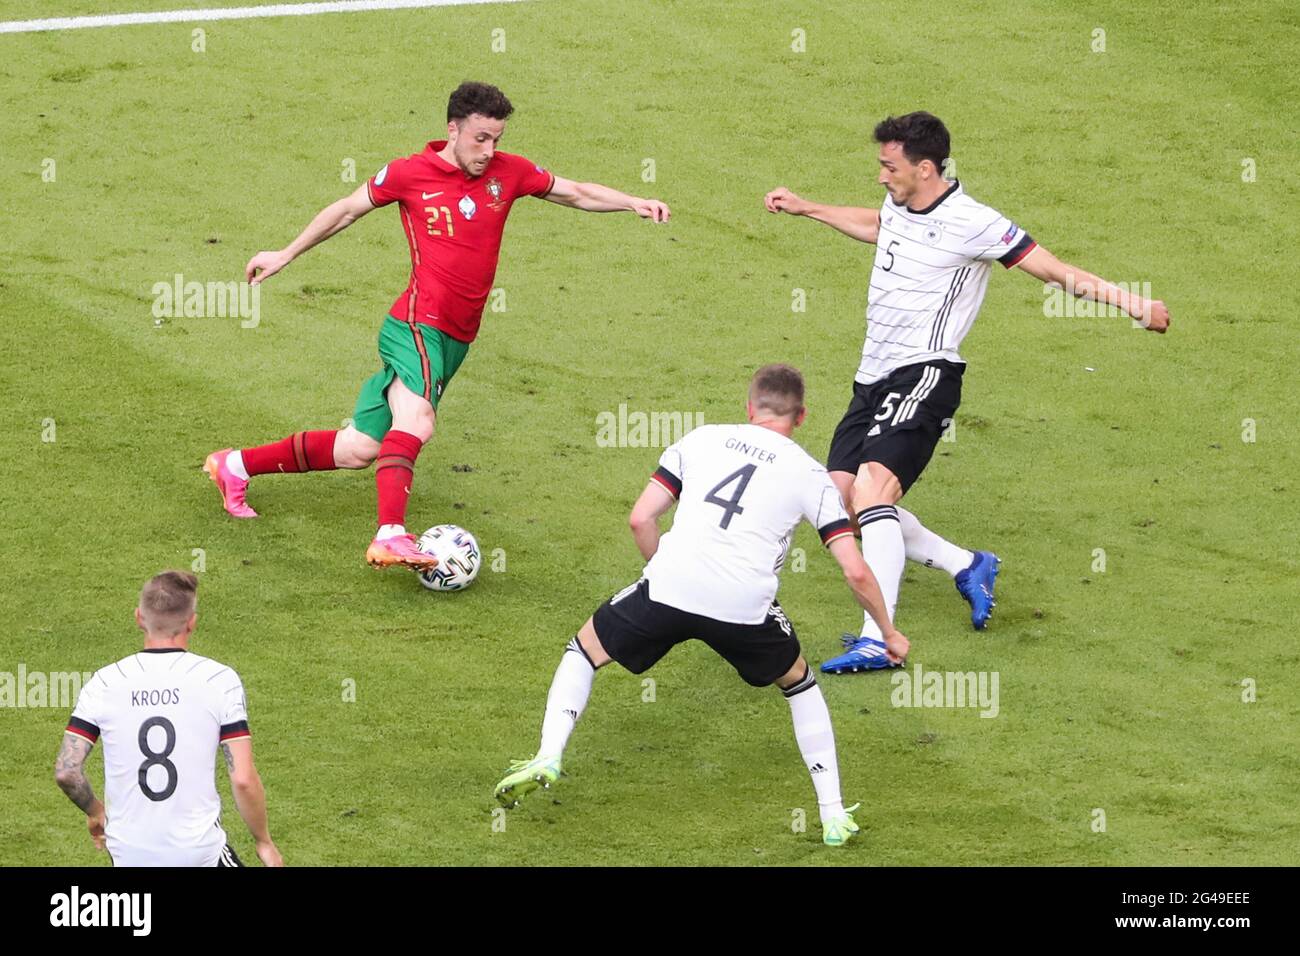 Munich, Germany. 19th June, 2021. Diogo Jota (top L) of Portugal breaks through the defense from Mats Hummels (up R) of Germany during the UEFA Euro 2020 Championship Group F match in Munich, Germany, June 19, 2021. Credit: Shan Yuqi/Xinhua/Alamy Live News Stock Photo